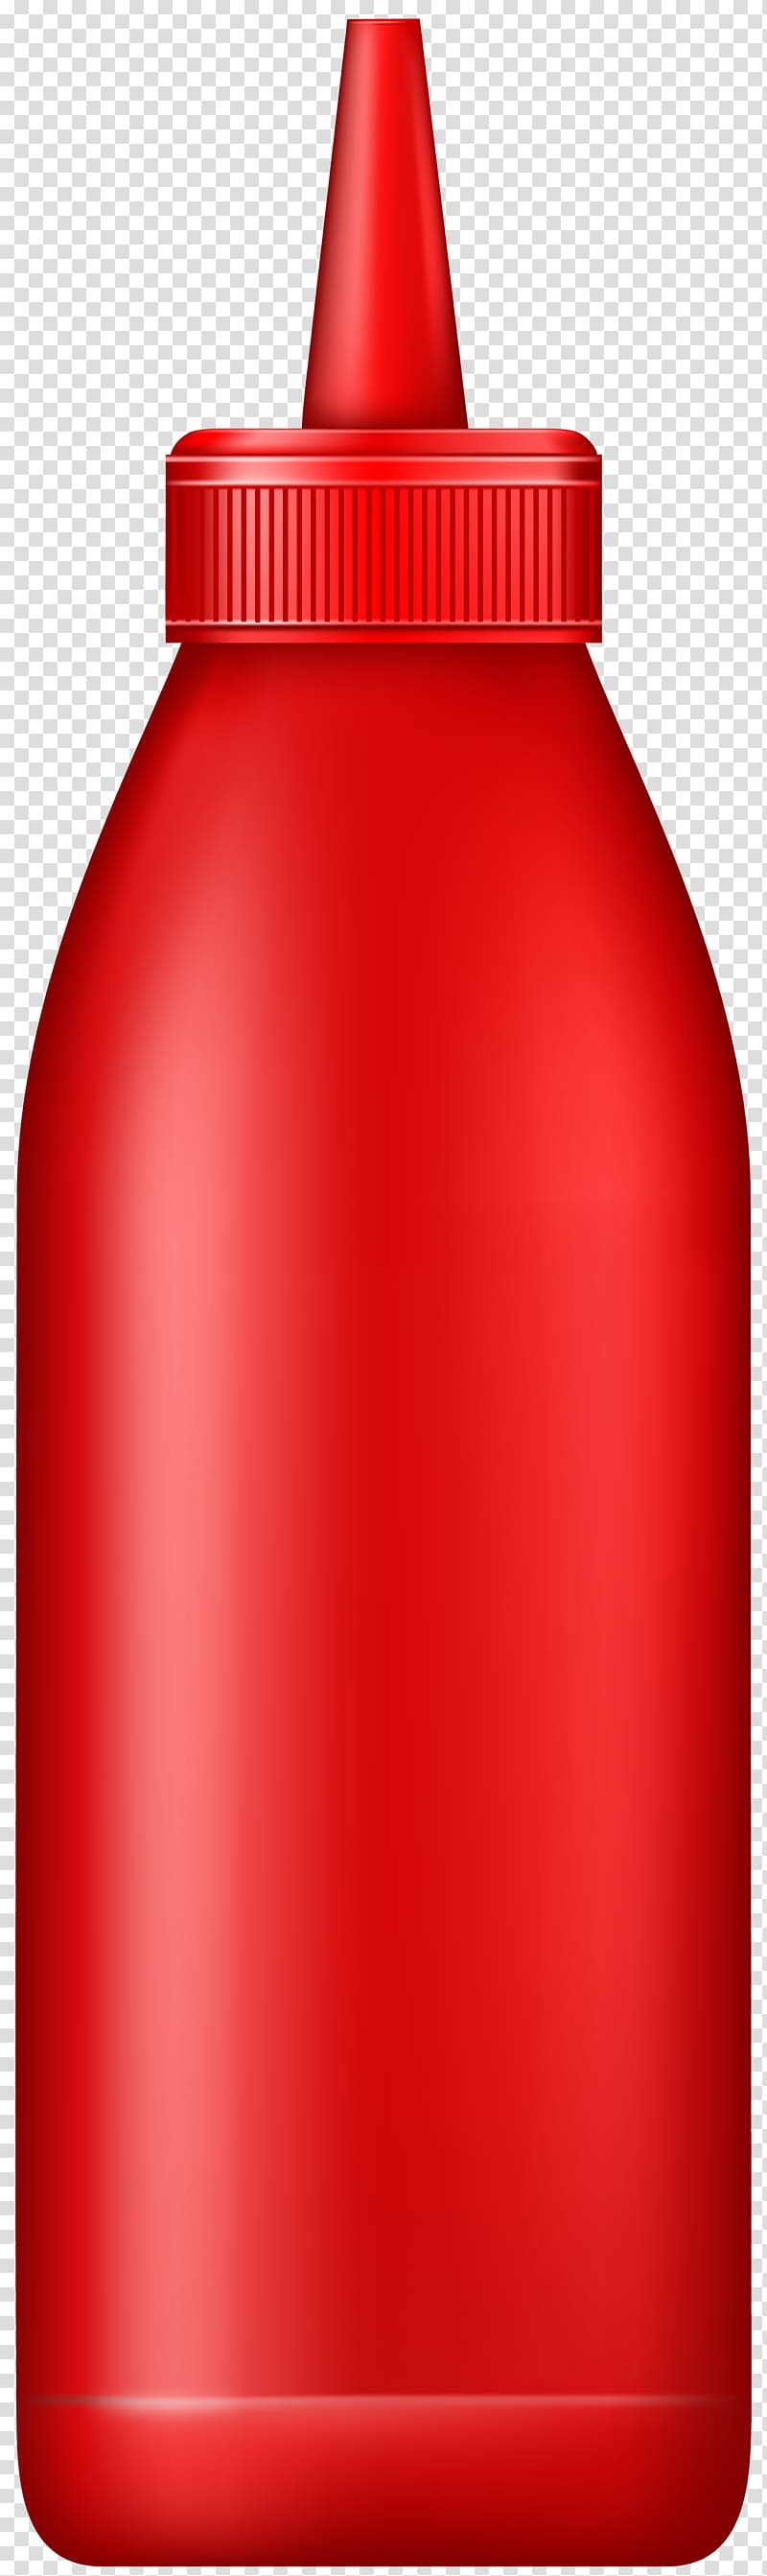 Water Bottles Product design Ketchup, water transparent background PNG ...